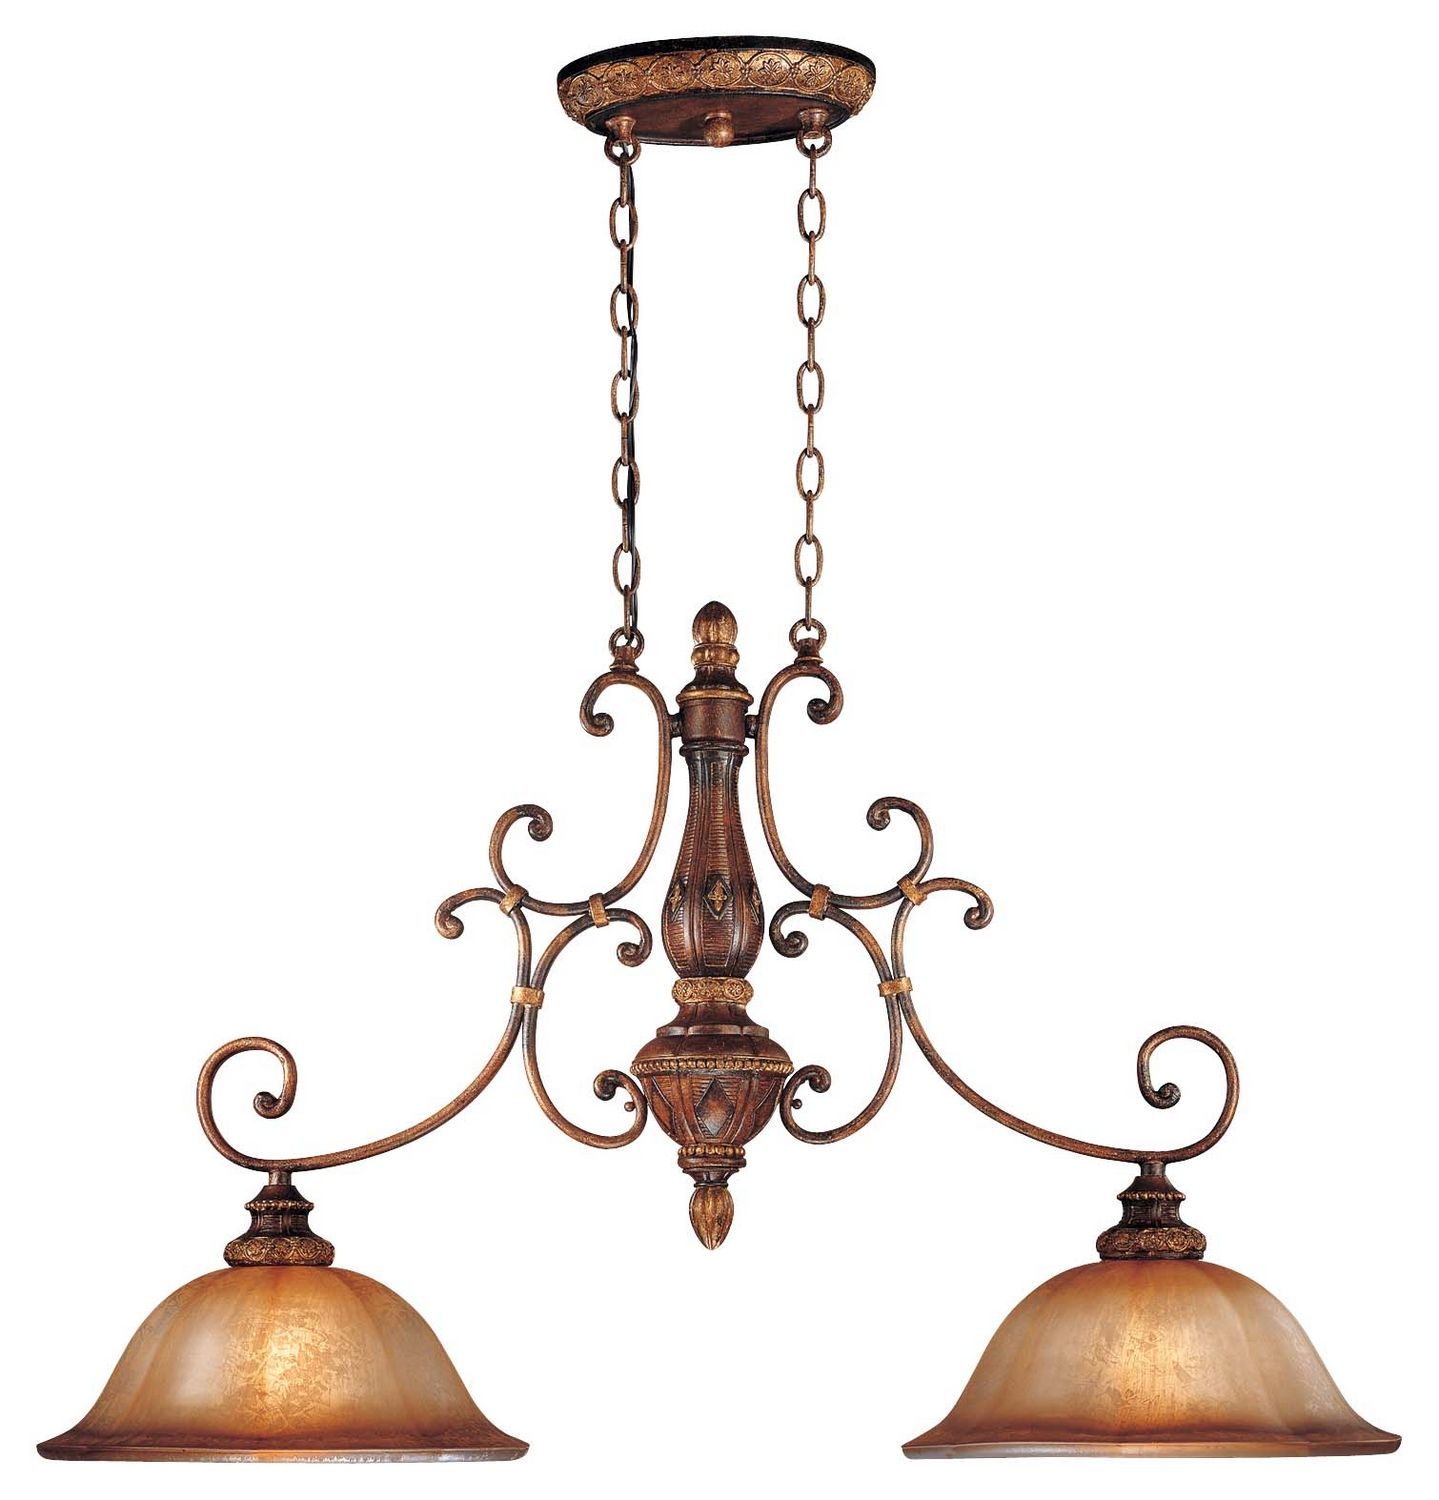 Tuscan style chandeliers 40